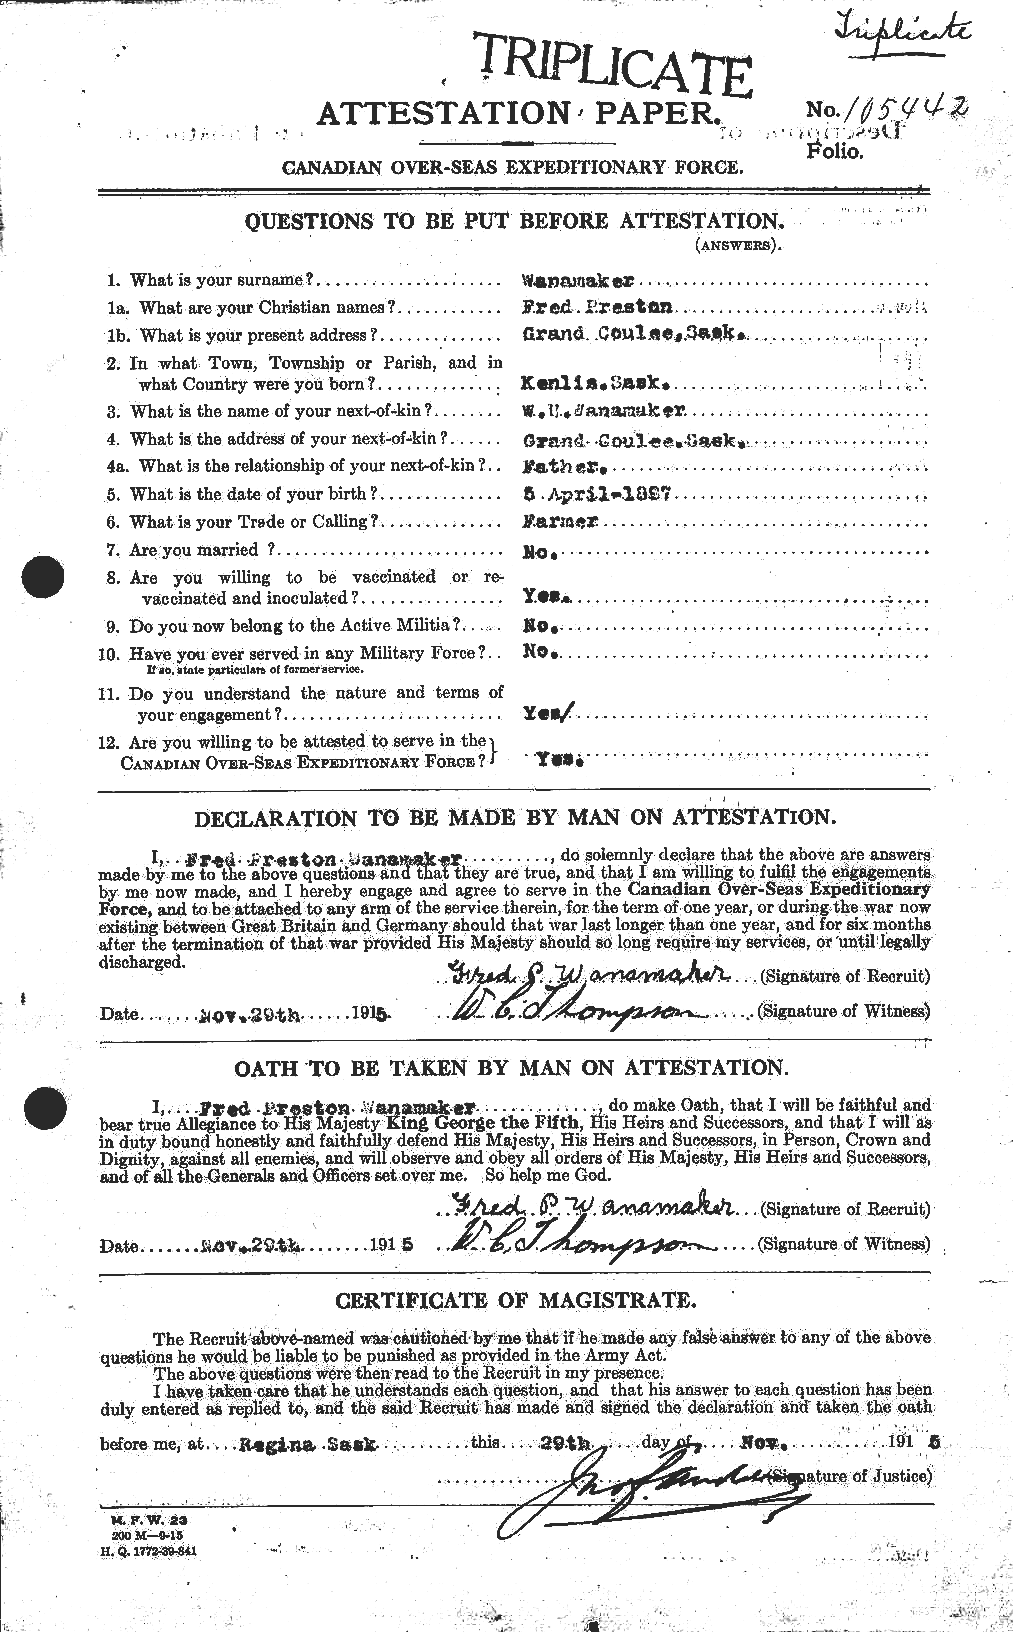 Personnel Records of the First World War - CEF 654906a